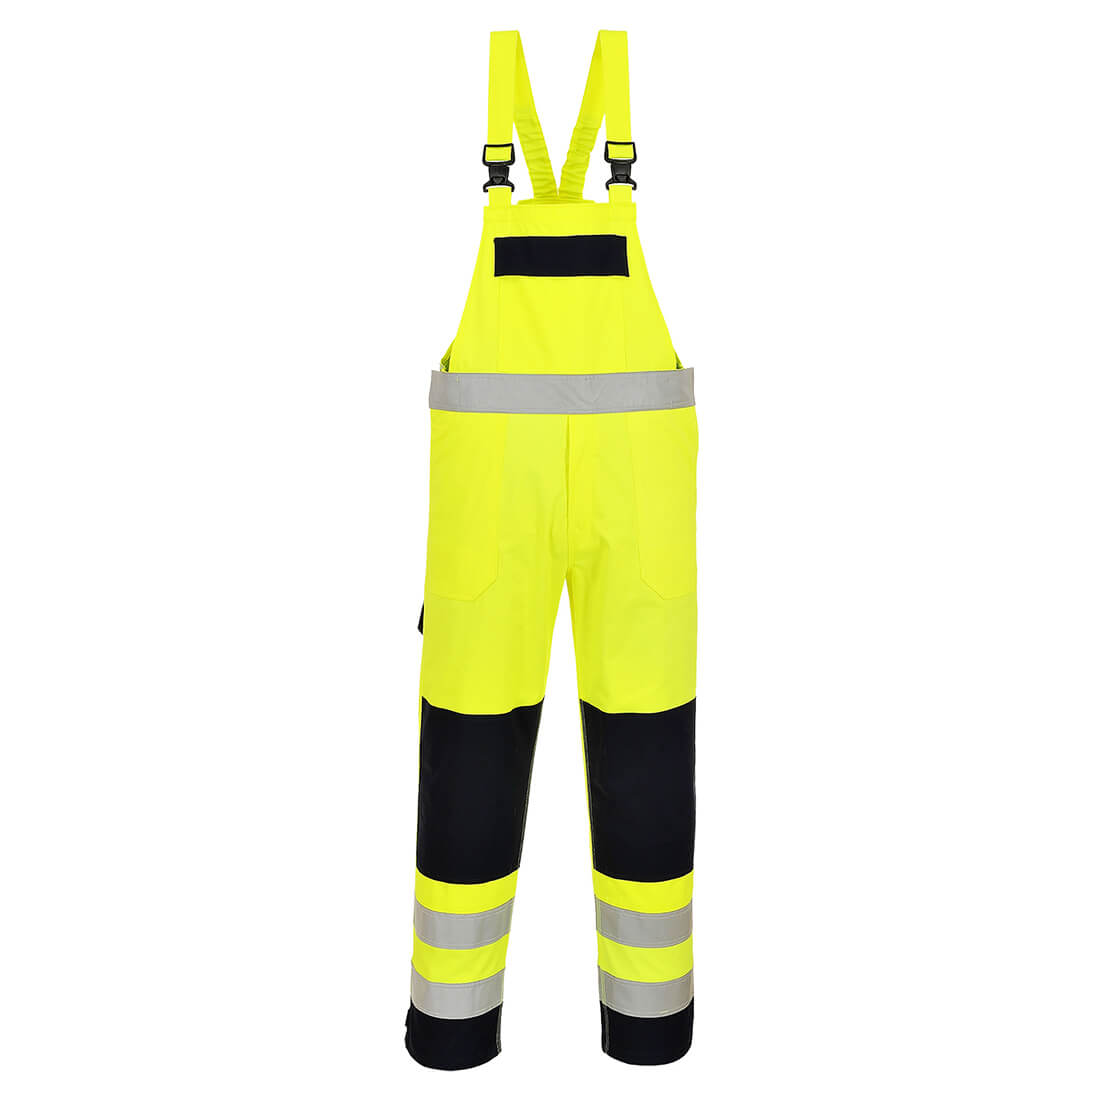 Image of Biz Flame Hi Vis Multi-Norm Flame Resistant Bib and Brace Yellow / Navy XL